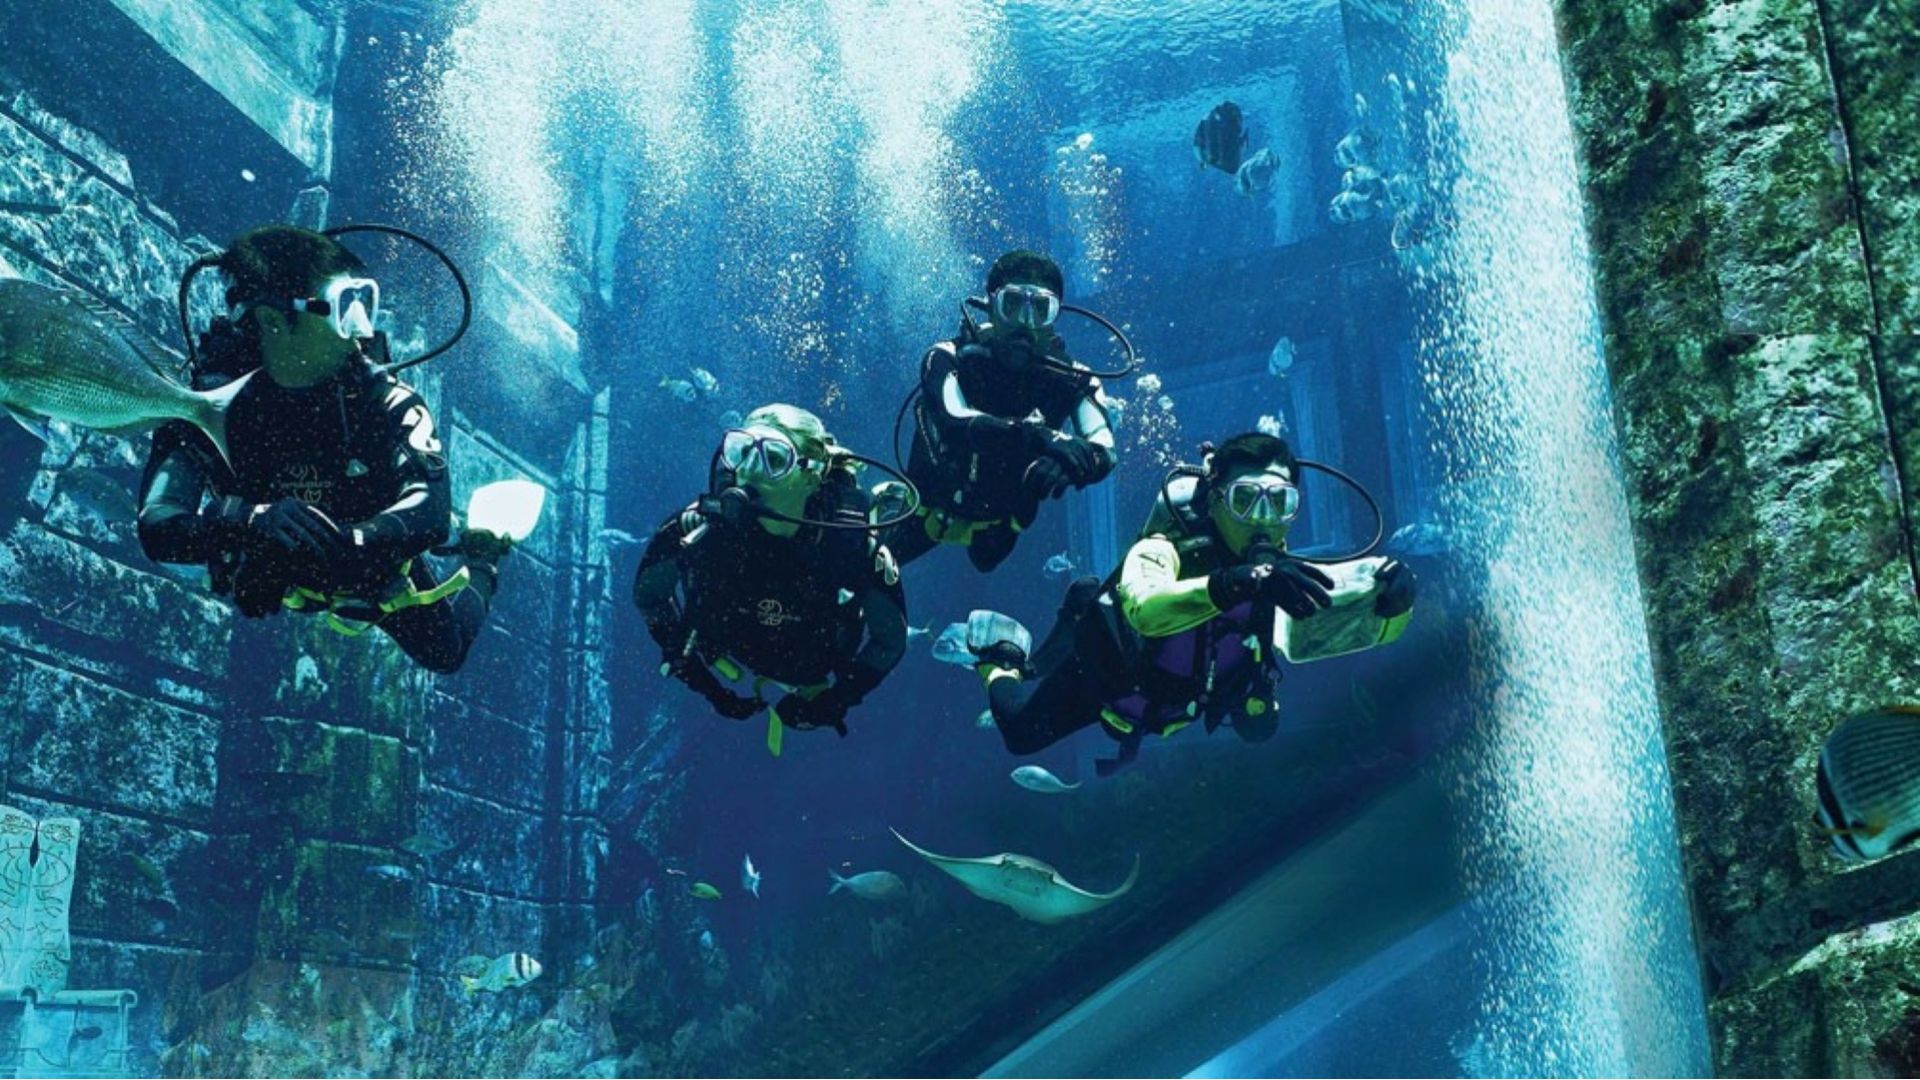 Four divers underwater swimming with the fishes and other marine life